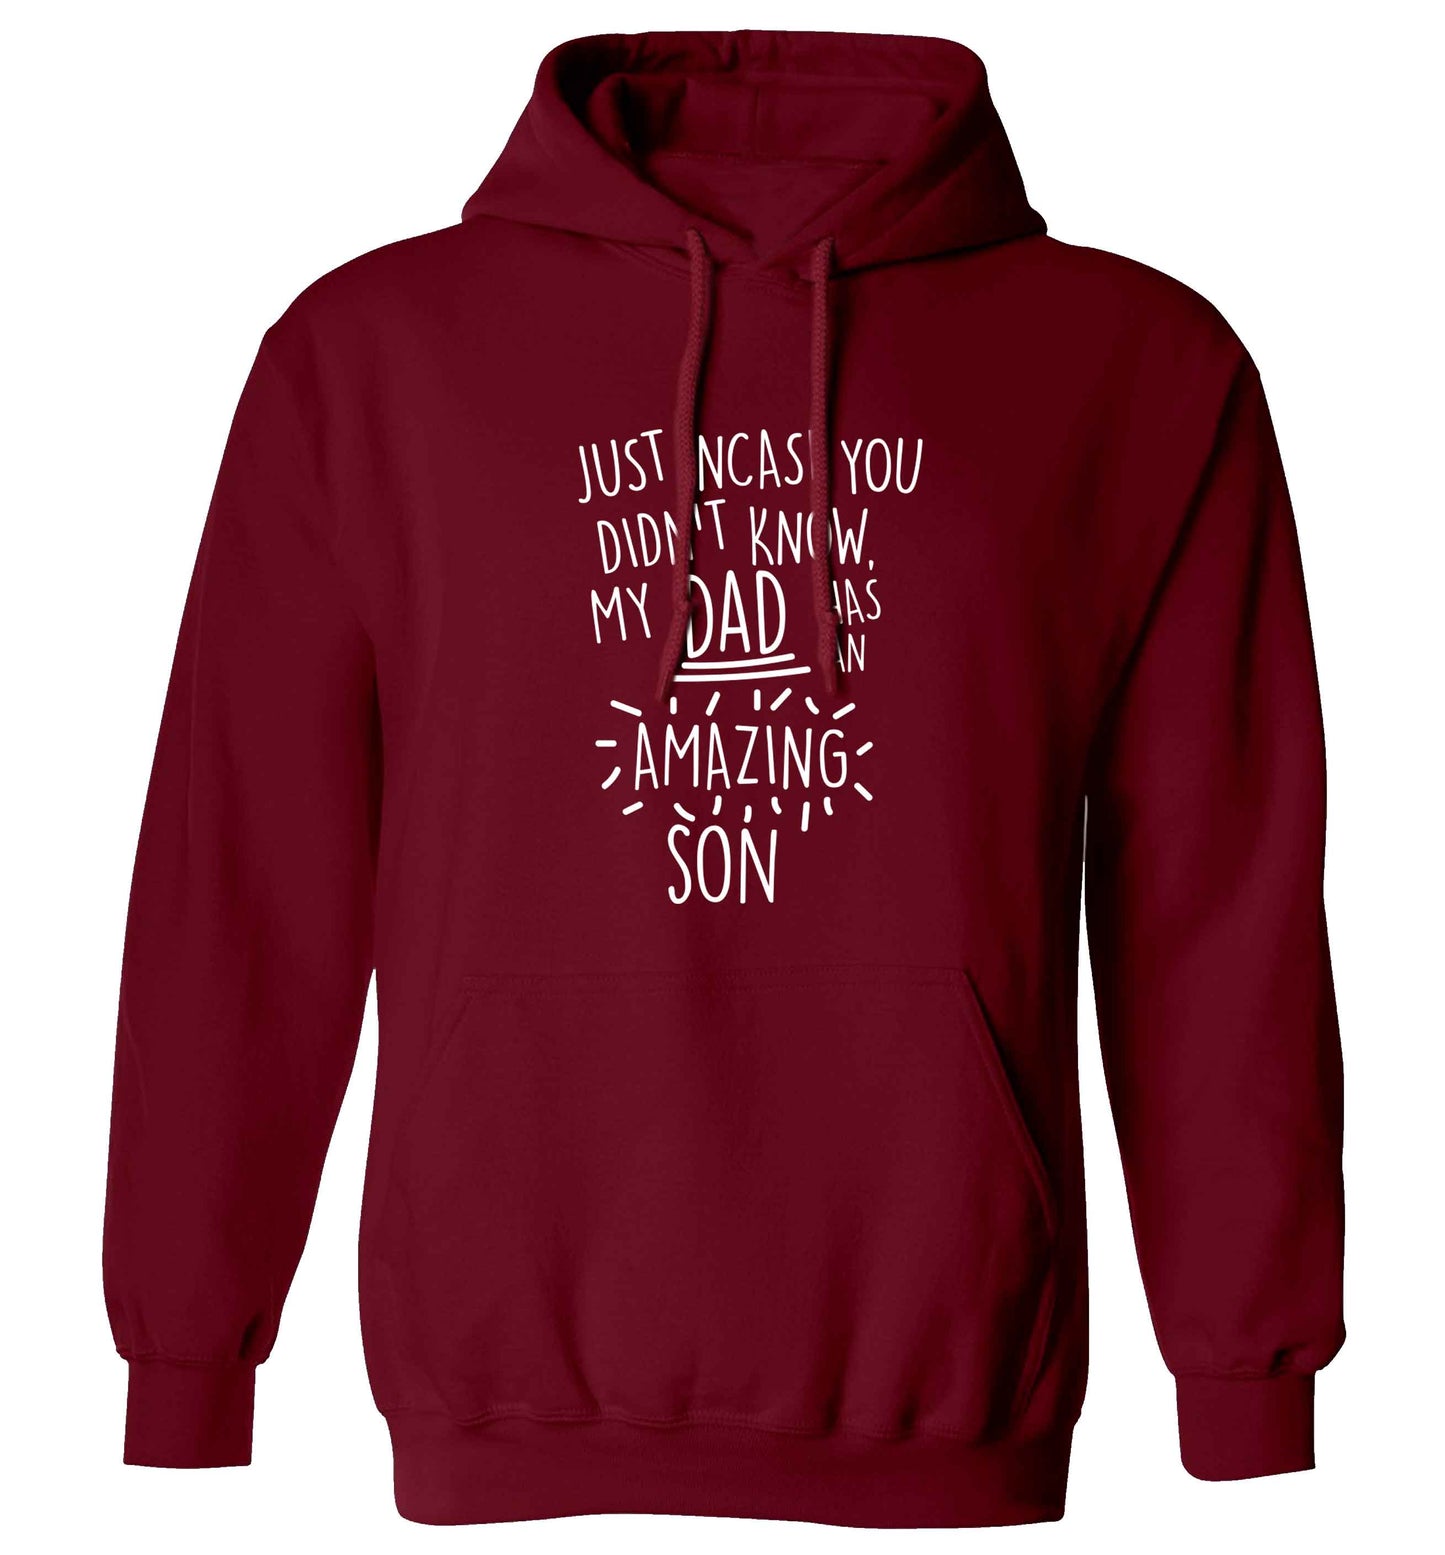 Just incase you didn't know my dad has an amazing son adults unisex maroon hoodie 2XL